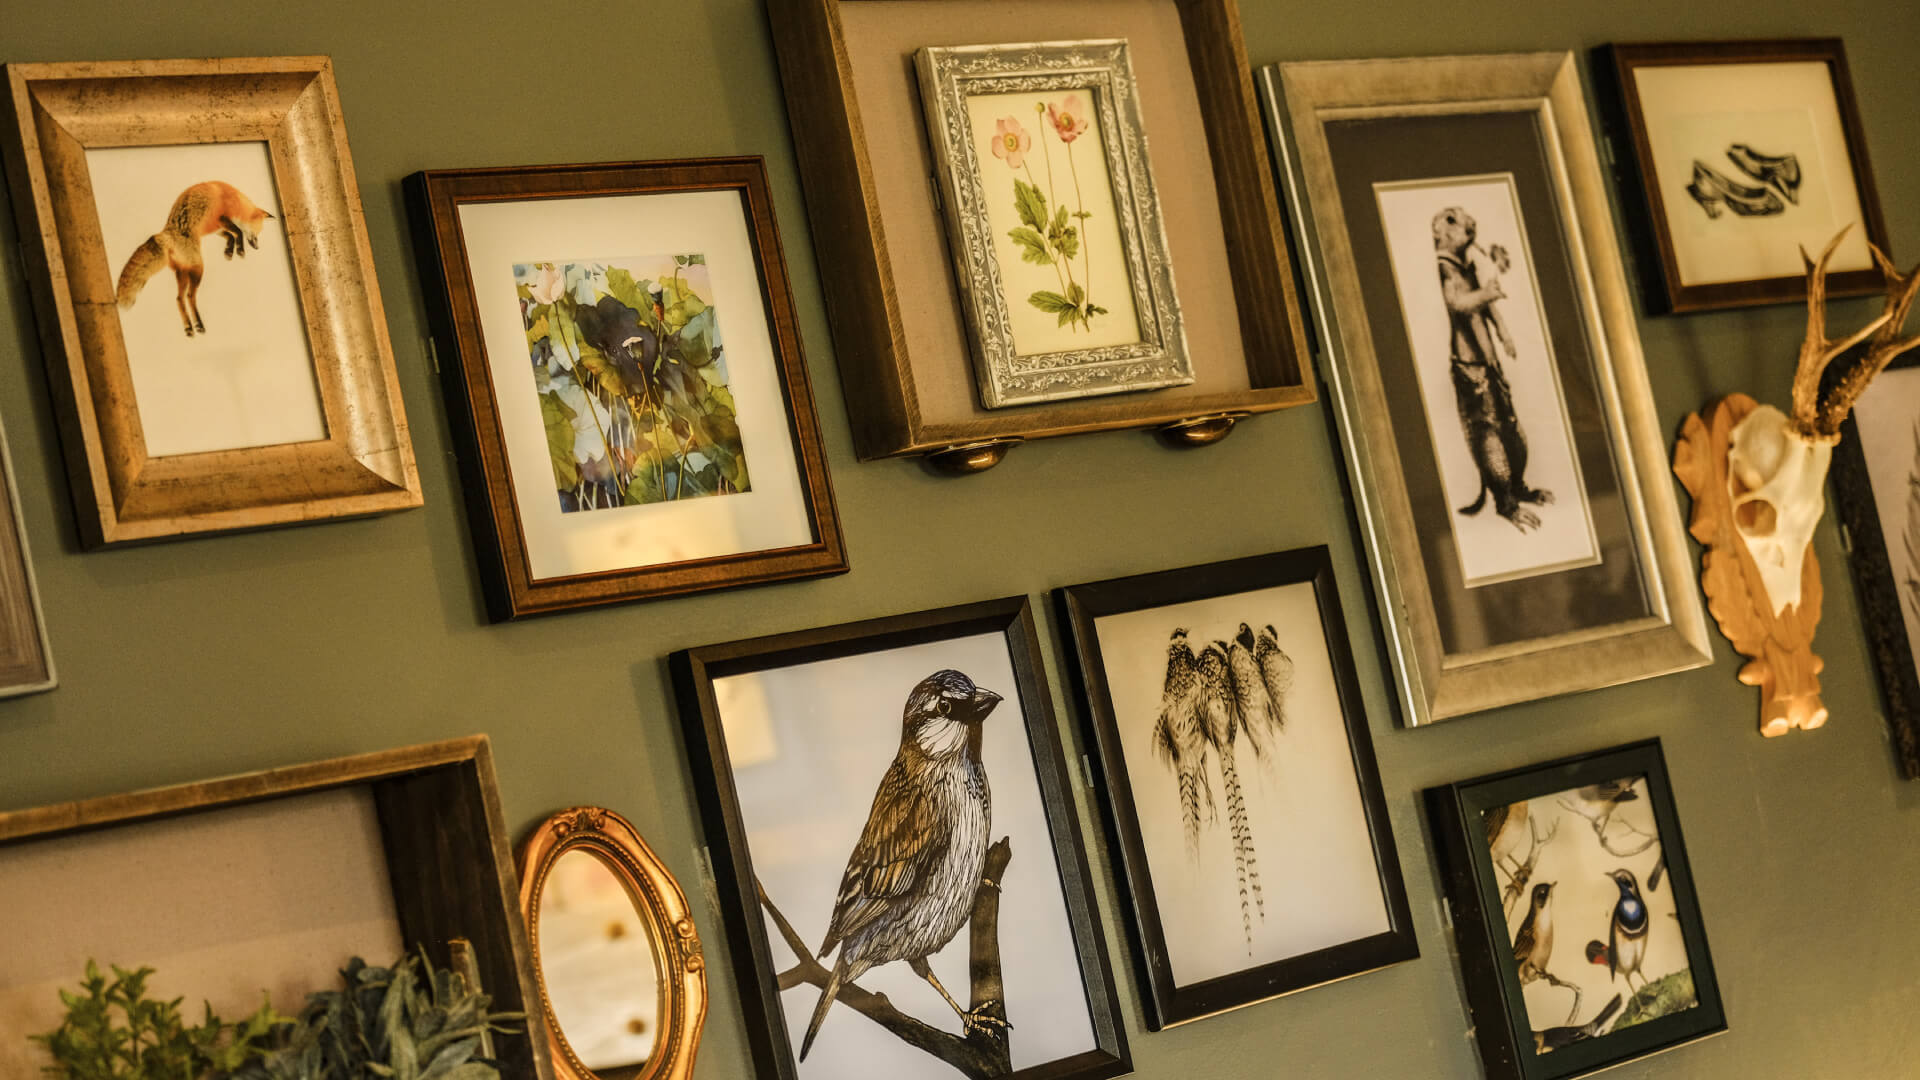 The decor at the Saracen's Head including beautiful wildlife pictures in frames